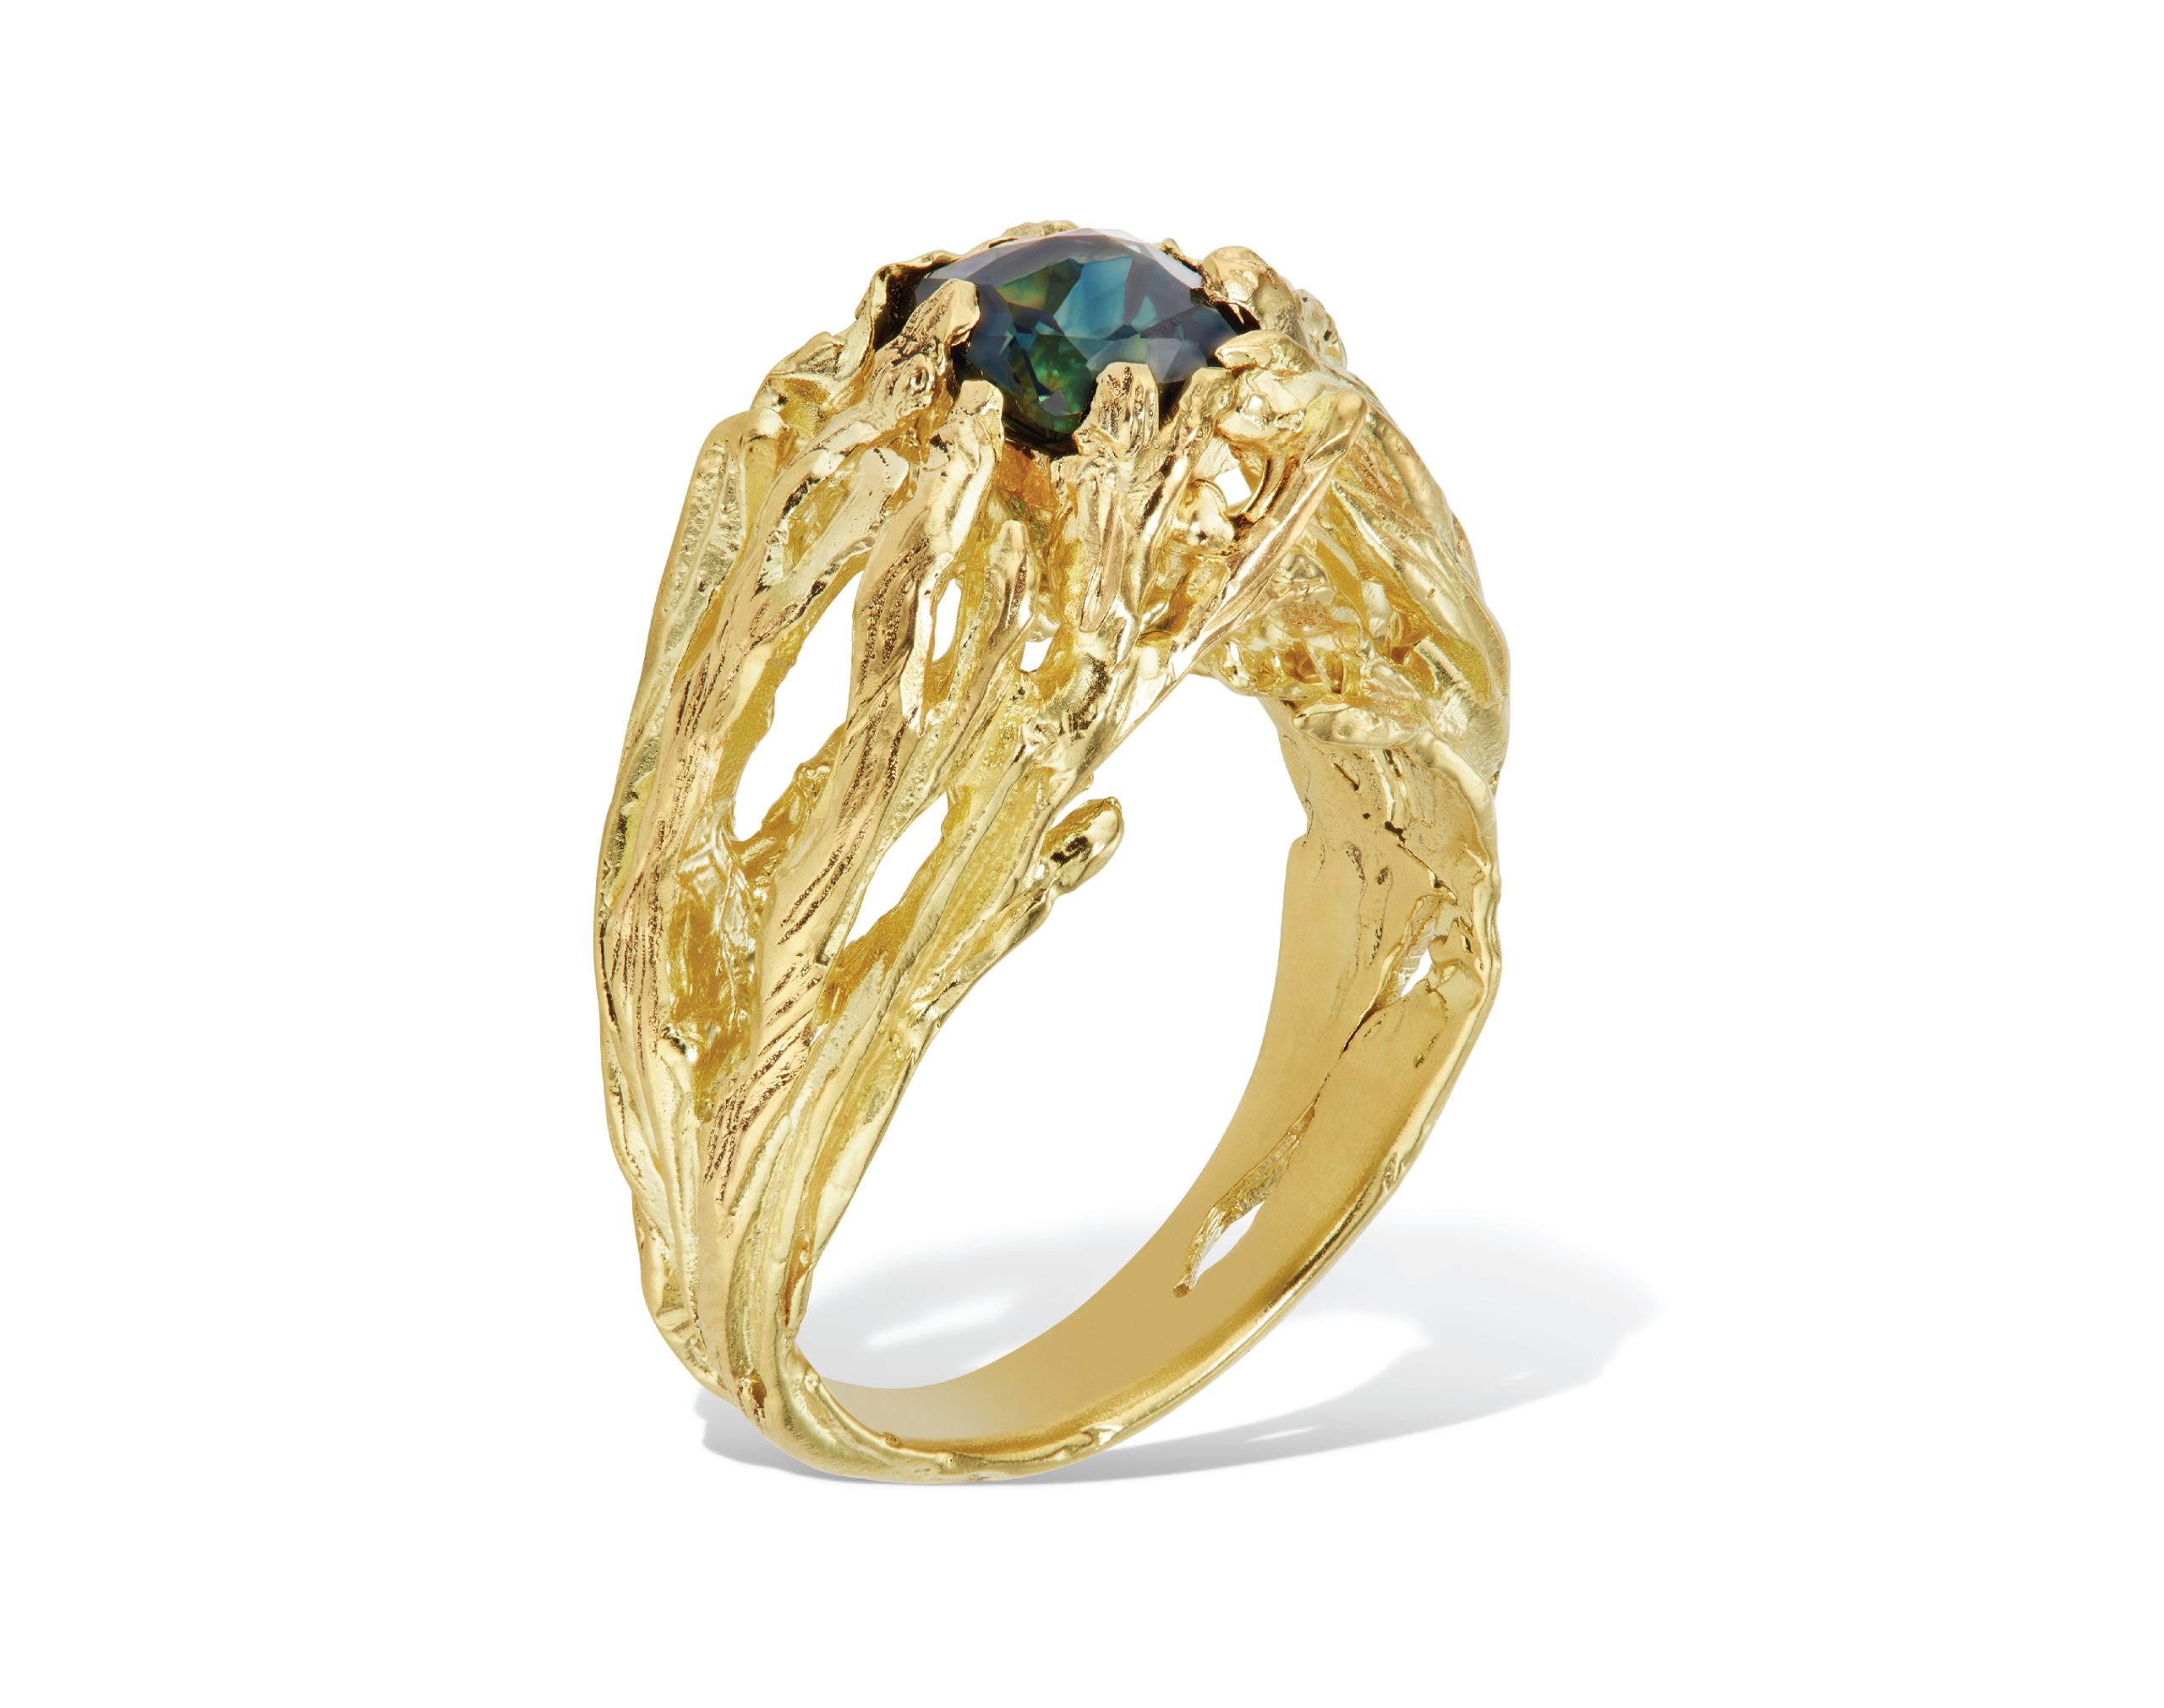 Clio Saskia – Bowerbird Cushion Sapphire Ring, one of a kind – recycled 18ct yellow gold, 1.34ct Australian blue sapphire – Upright White Product Shot edit